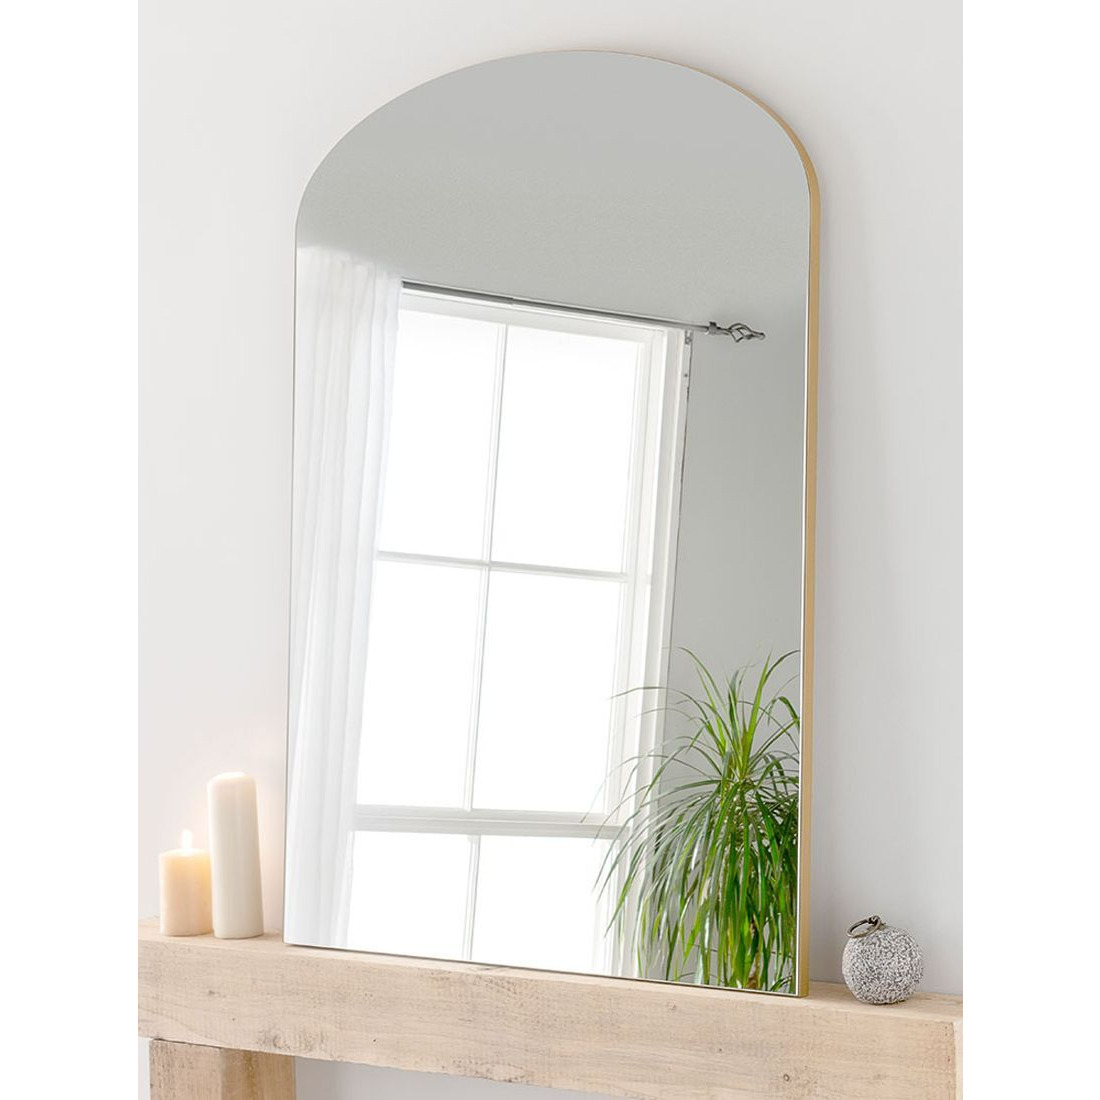 Yearn Delicacy Arched Wood Frame Leaner Mirror - image 1